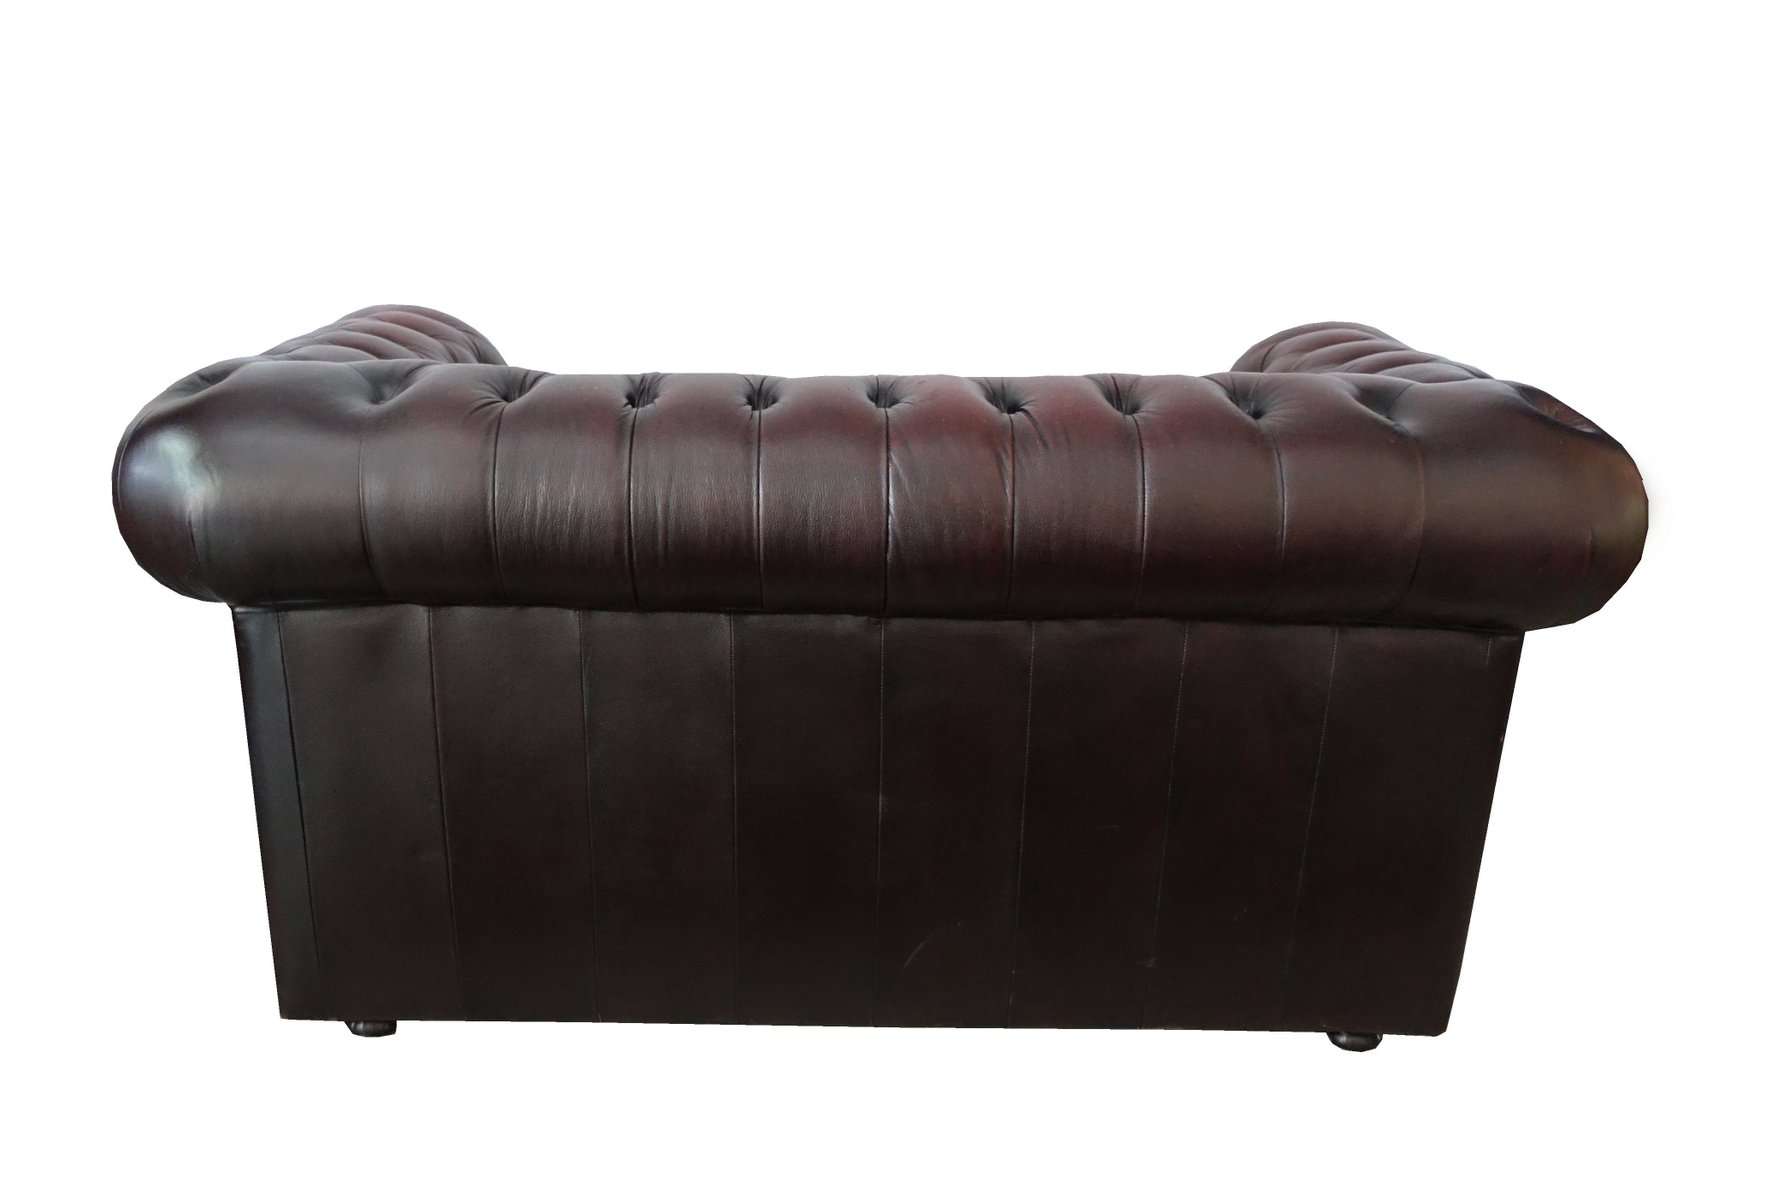 Vintage Chesterfield Quilted Leather Sofa for sale at Pamono